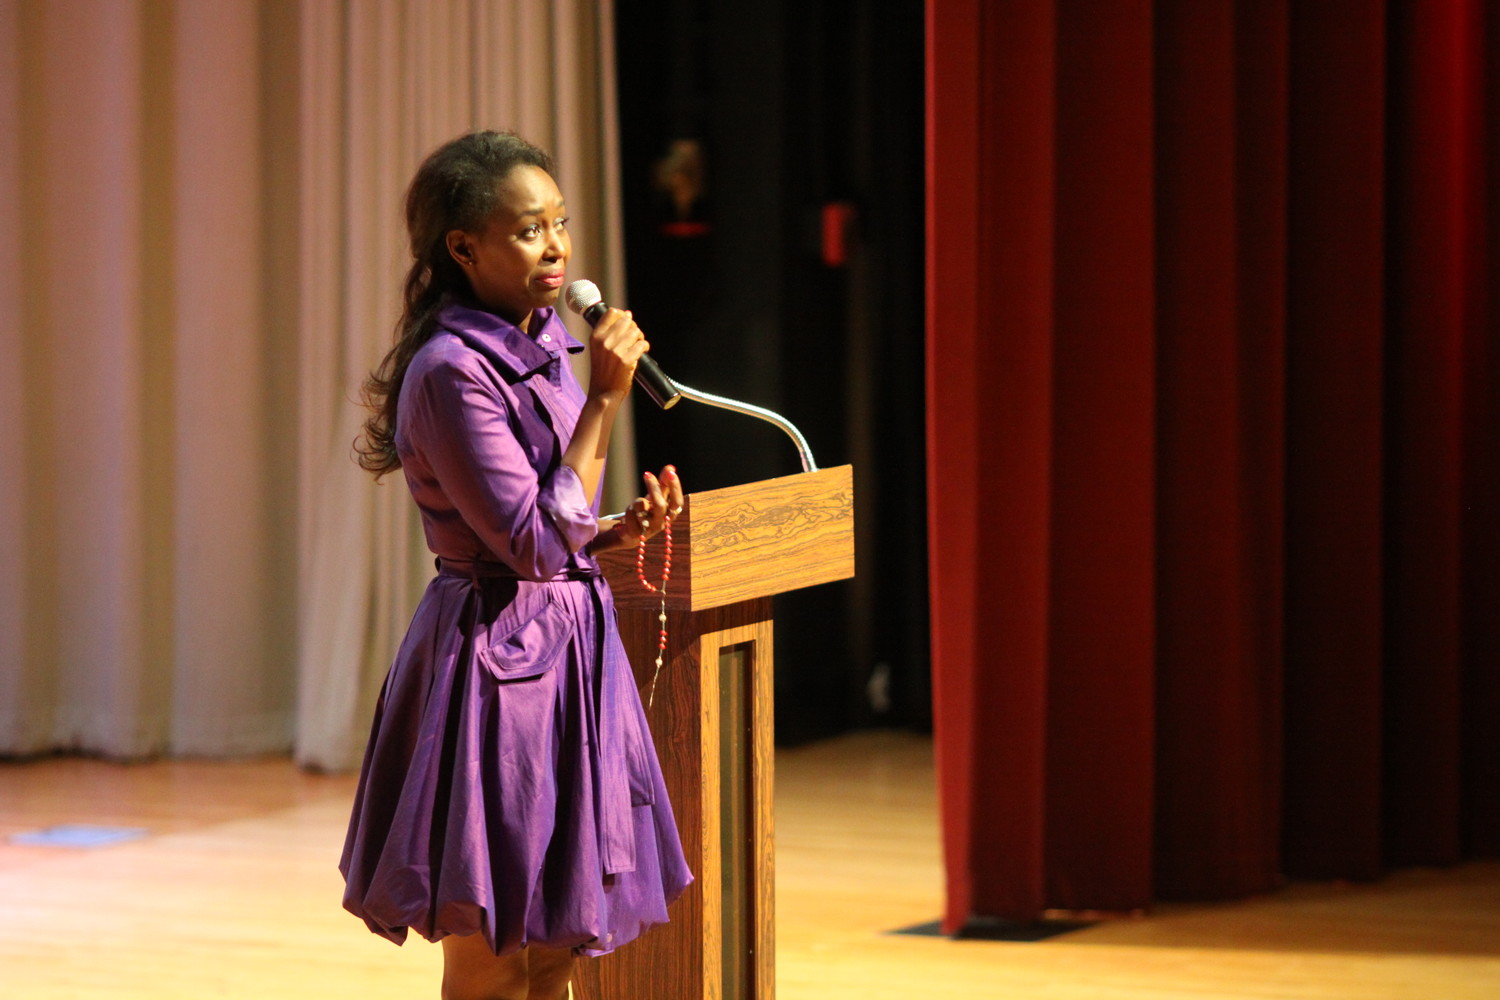 On October 10, Immaculée Ilibagiza, a Rwandan American author and motivational speaker, visited McVinney Auditorium in Providence, to share her witness about how she survived during the Rwandan Genocide, her deep Catholic faith and devotion to the Blessed Mother.